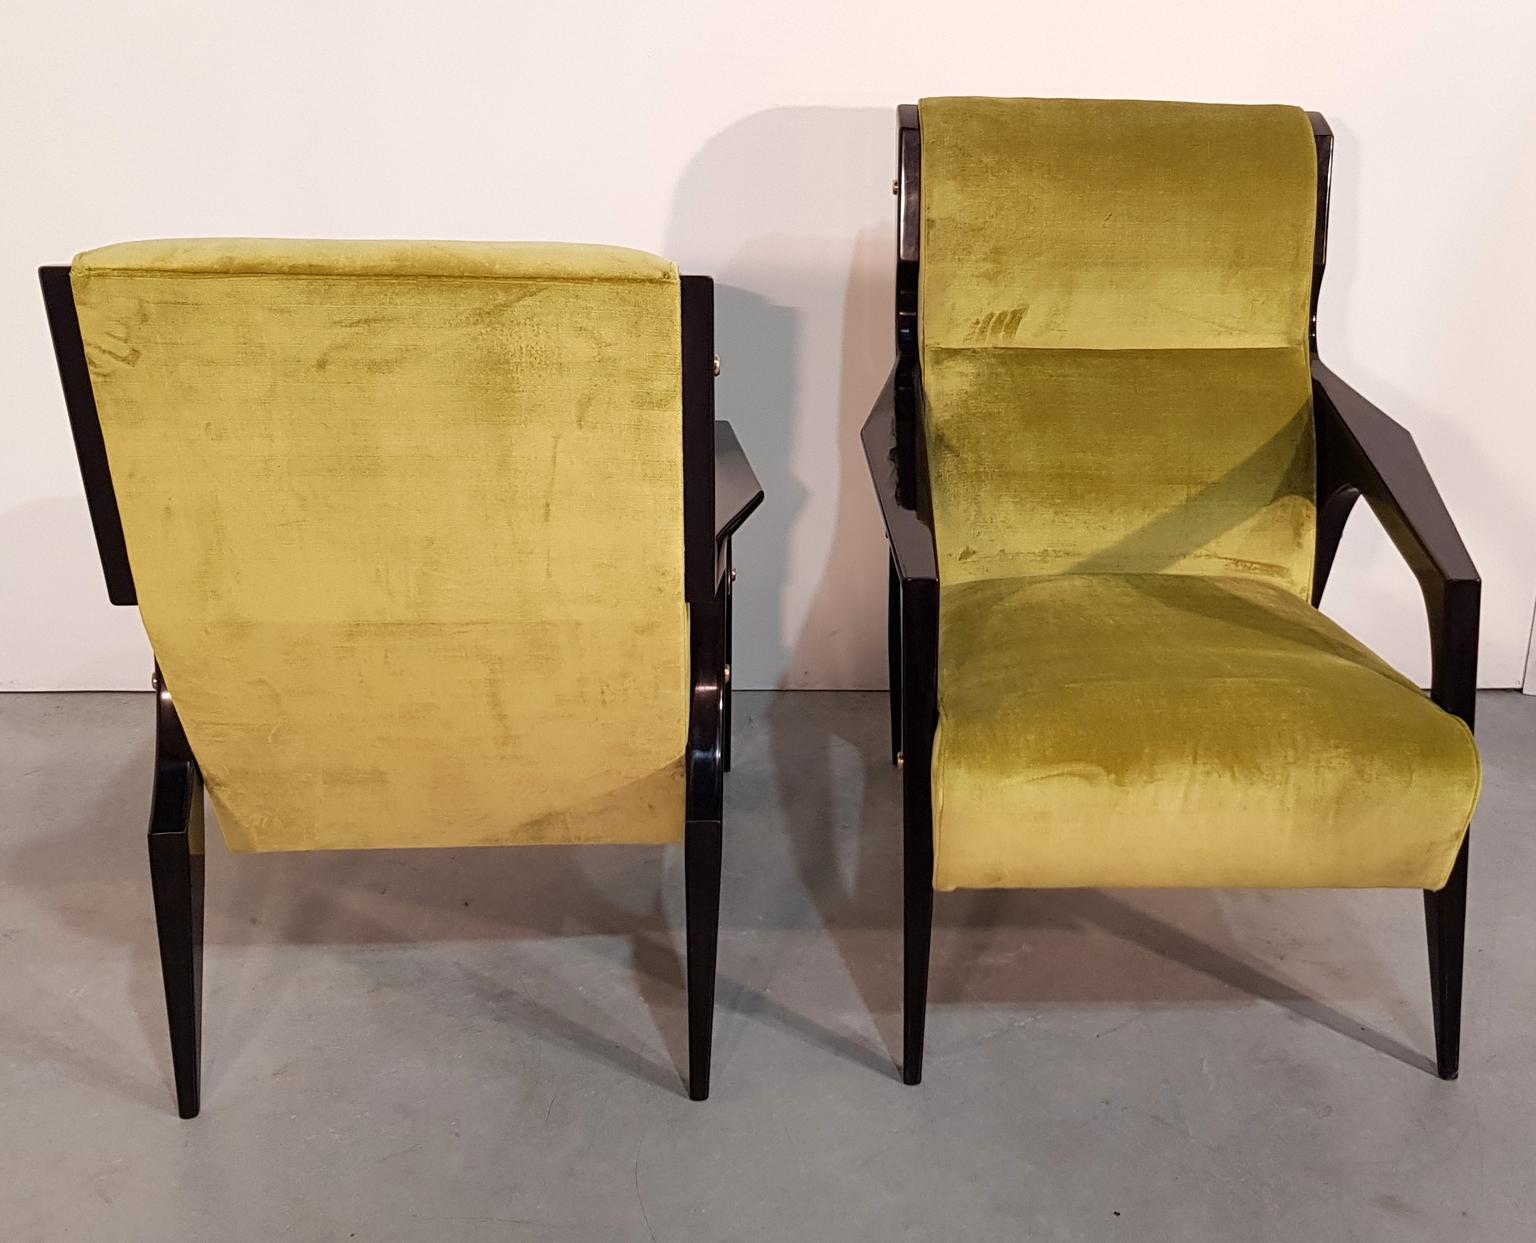 Pair of Italian Midcentury Green Upholstered Armchairs by Gio Ponti, 1950s For Sale 1